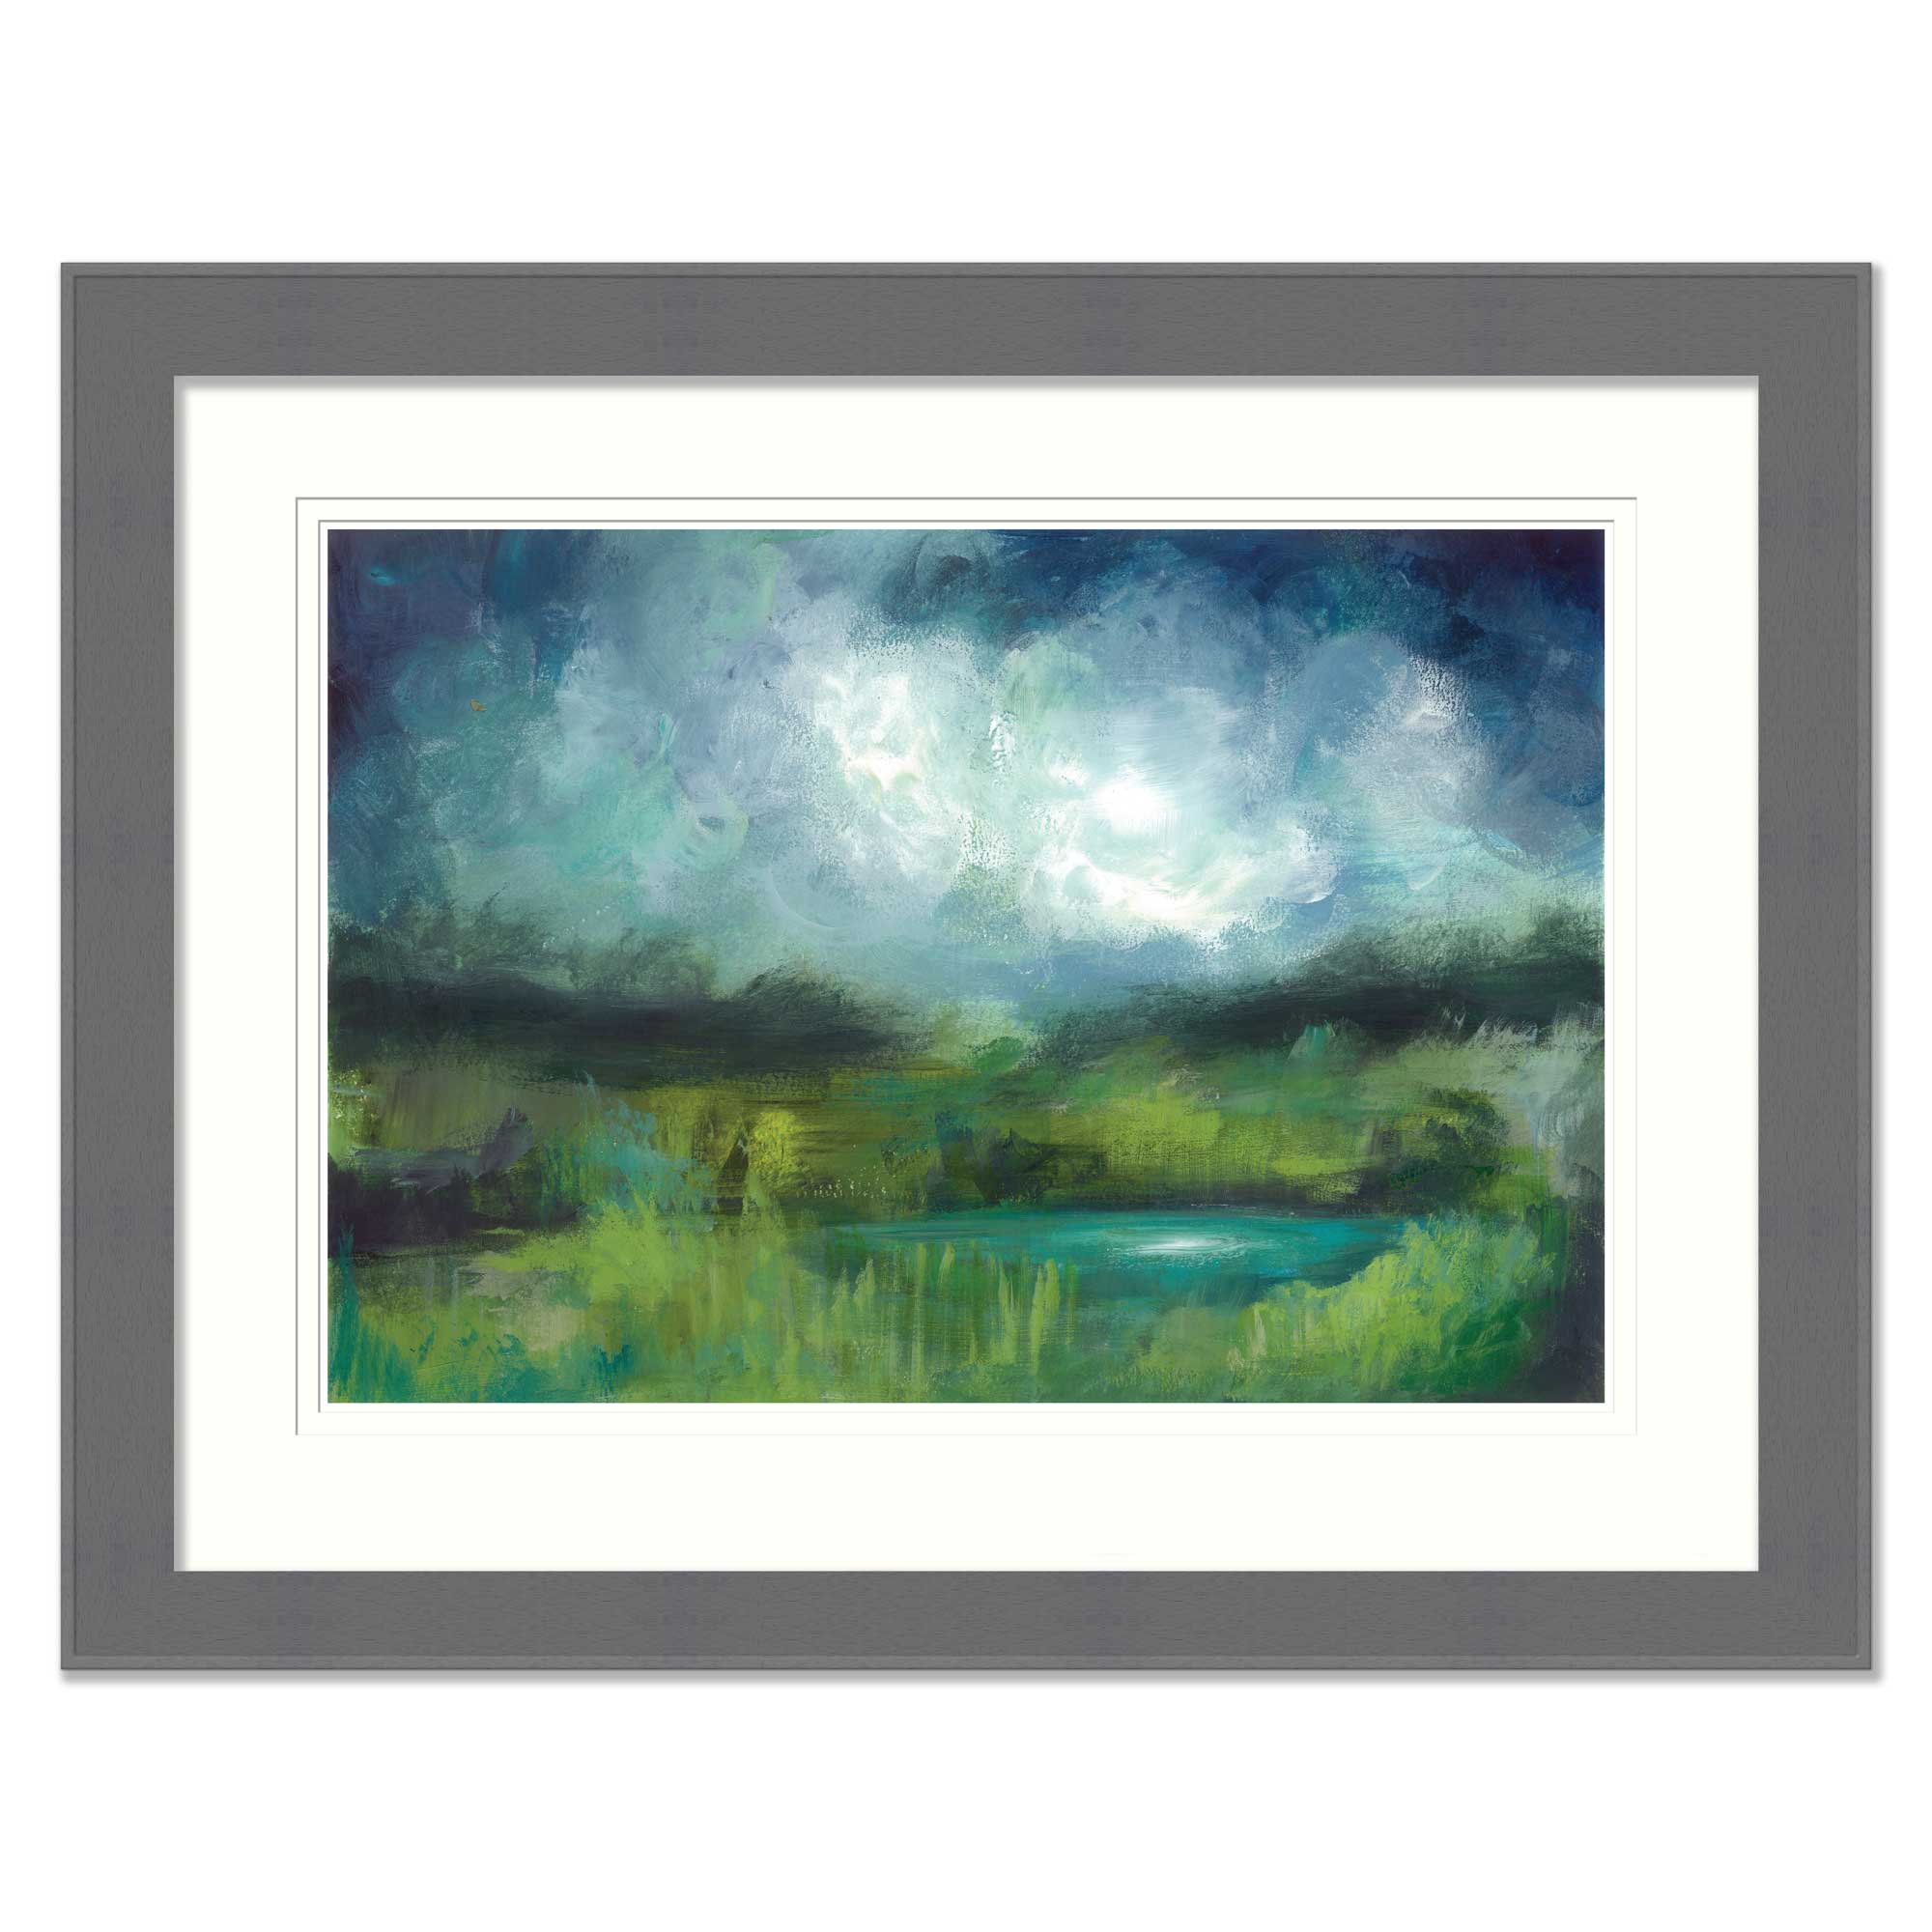 This Green And Pleasant Land Framed Print